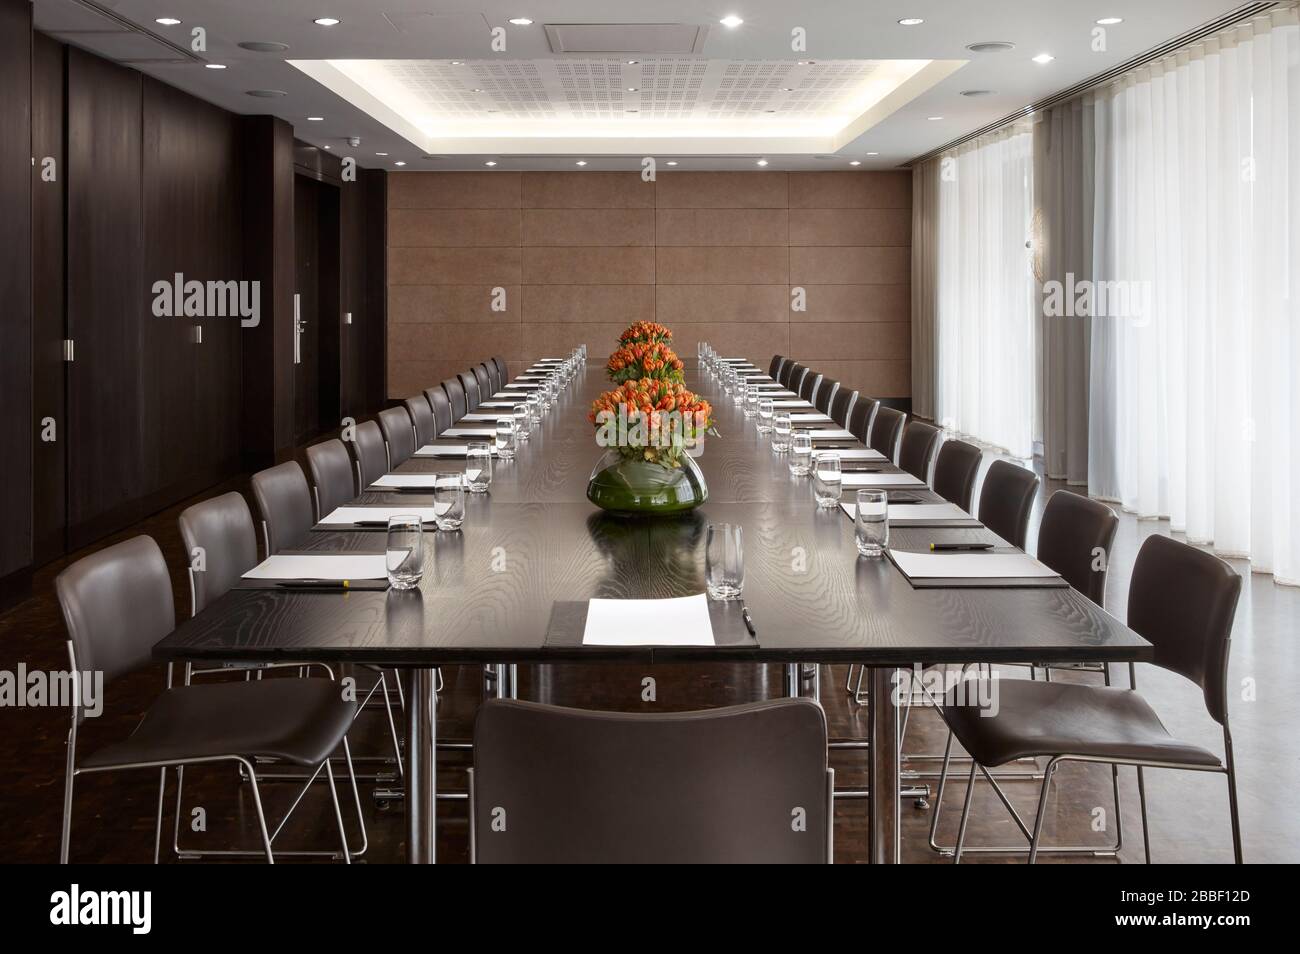 large meeting room conference, executive, decision, board, chairs, discussion, clients, talk, talks, Stock Photo